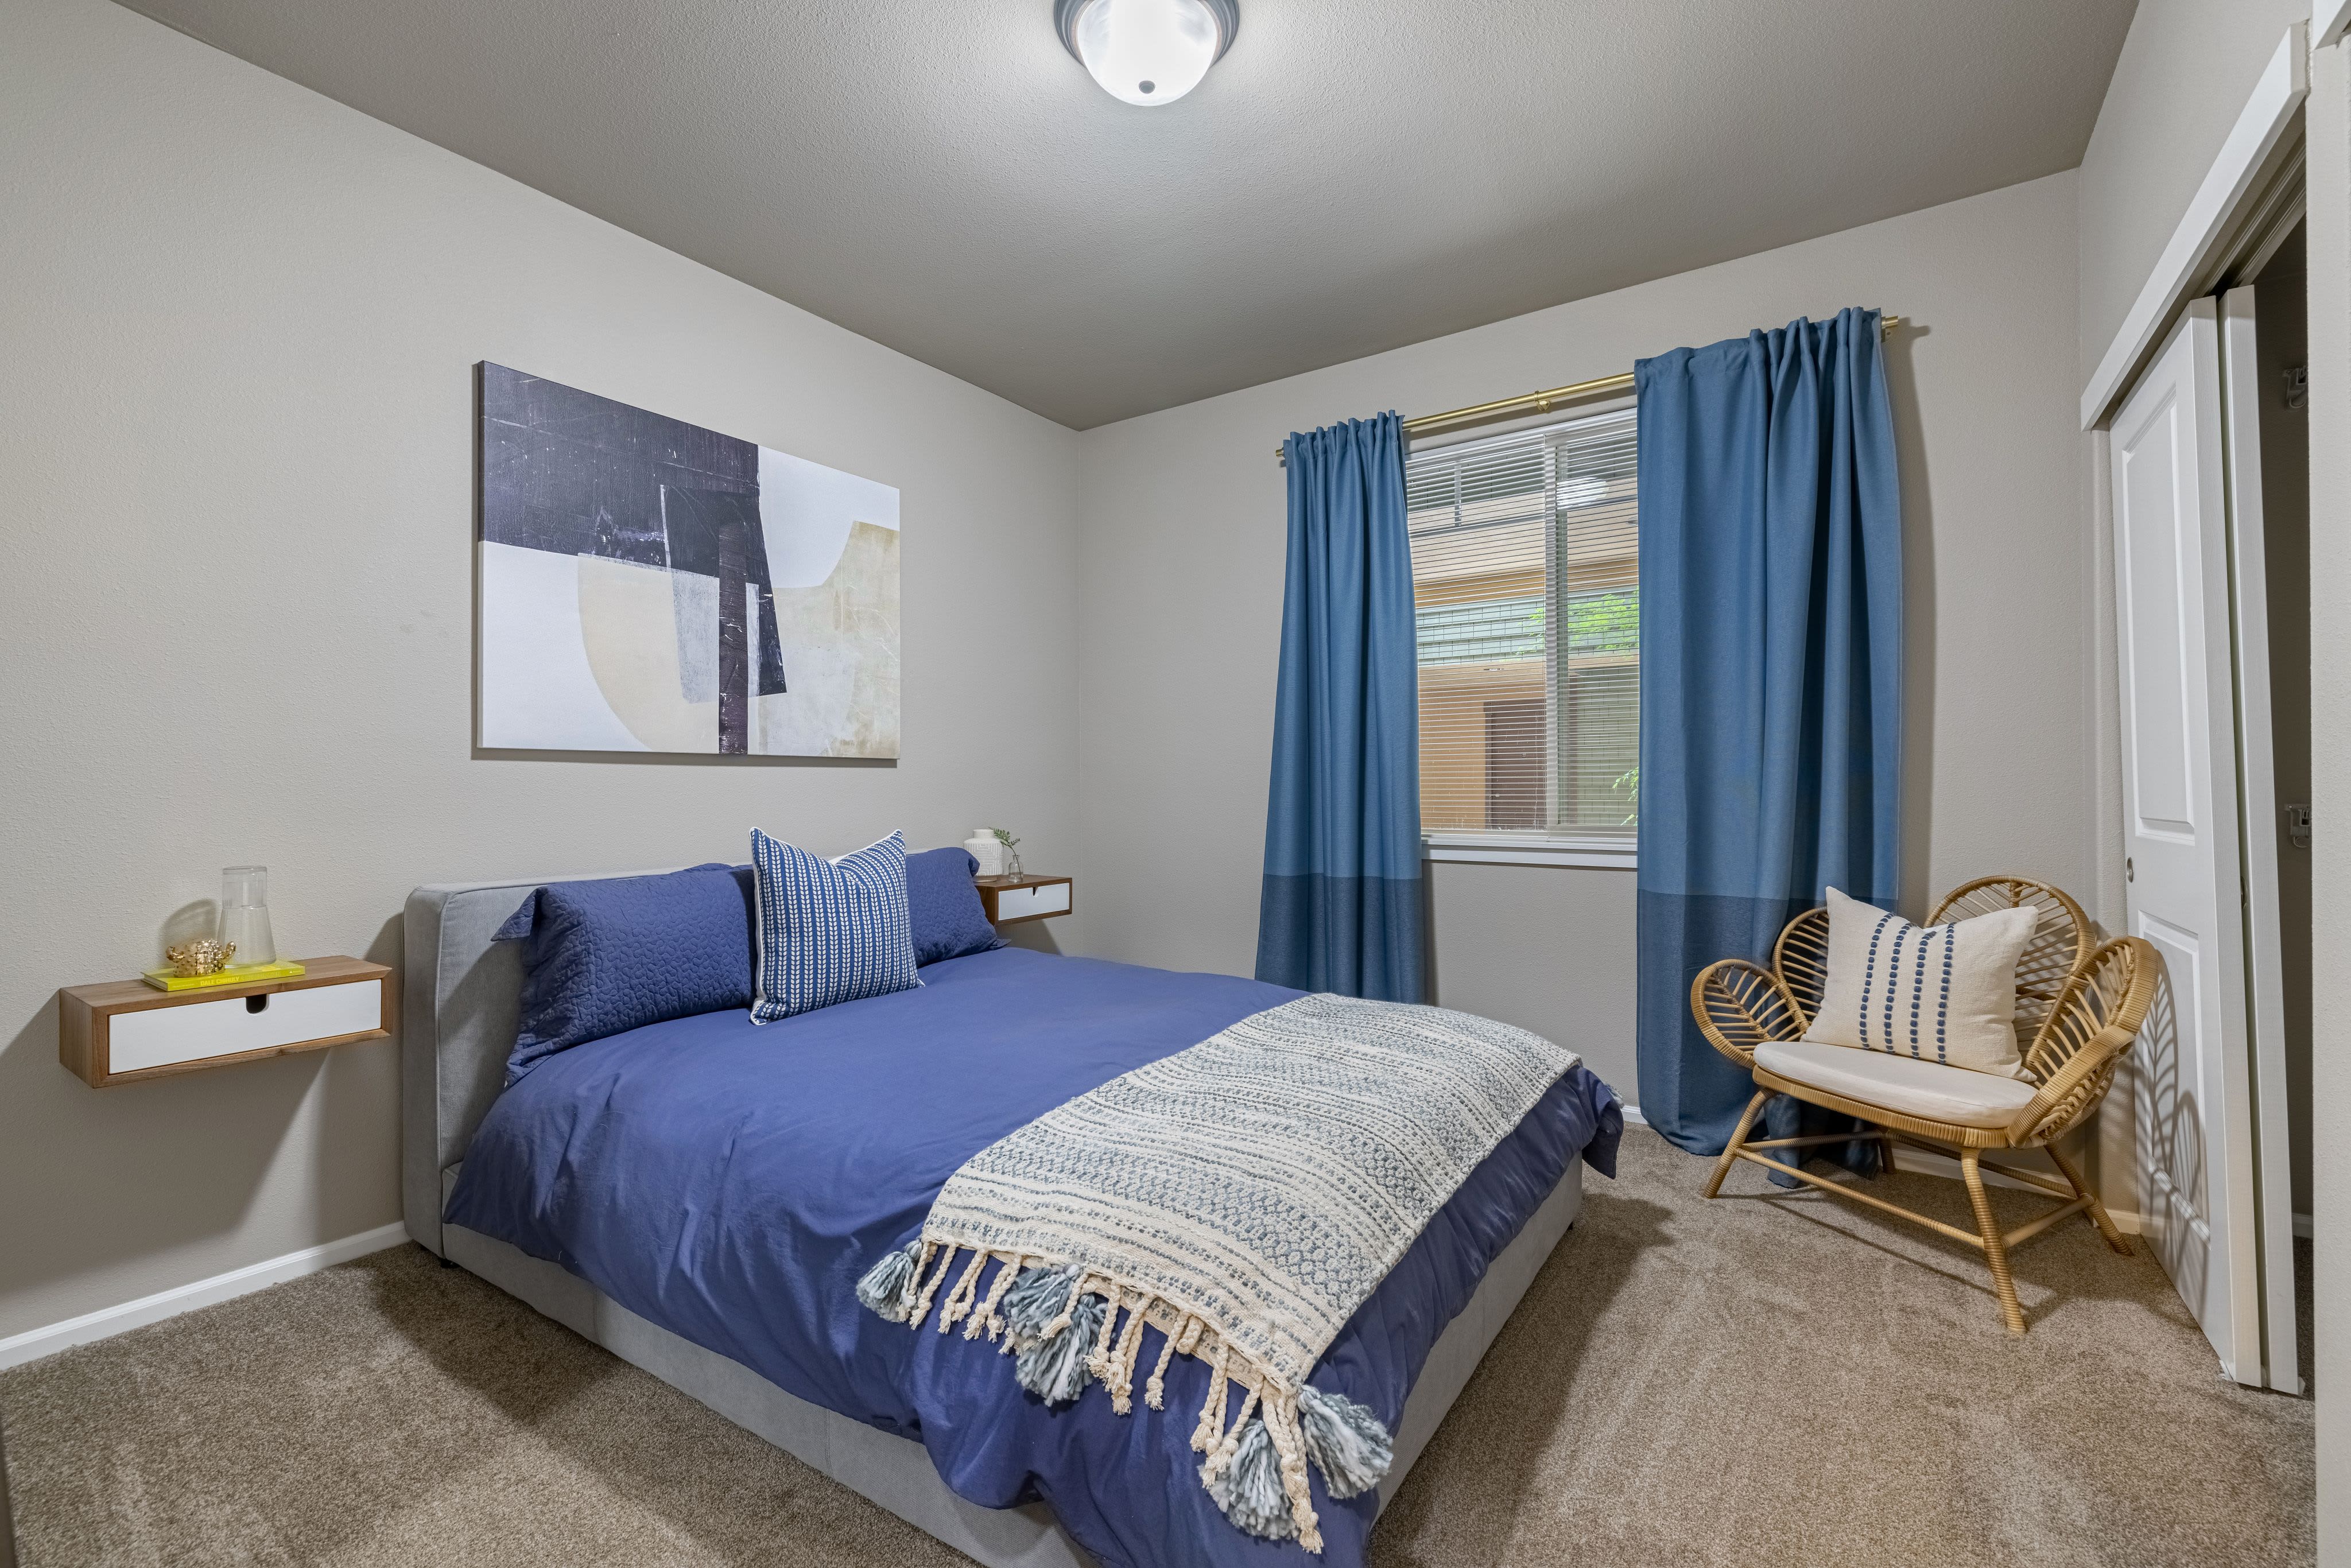 Bedroom at Copperline at Point Ruston in Tacoma, Washington